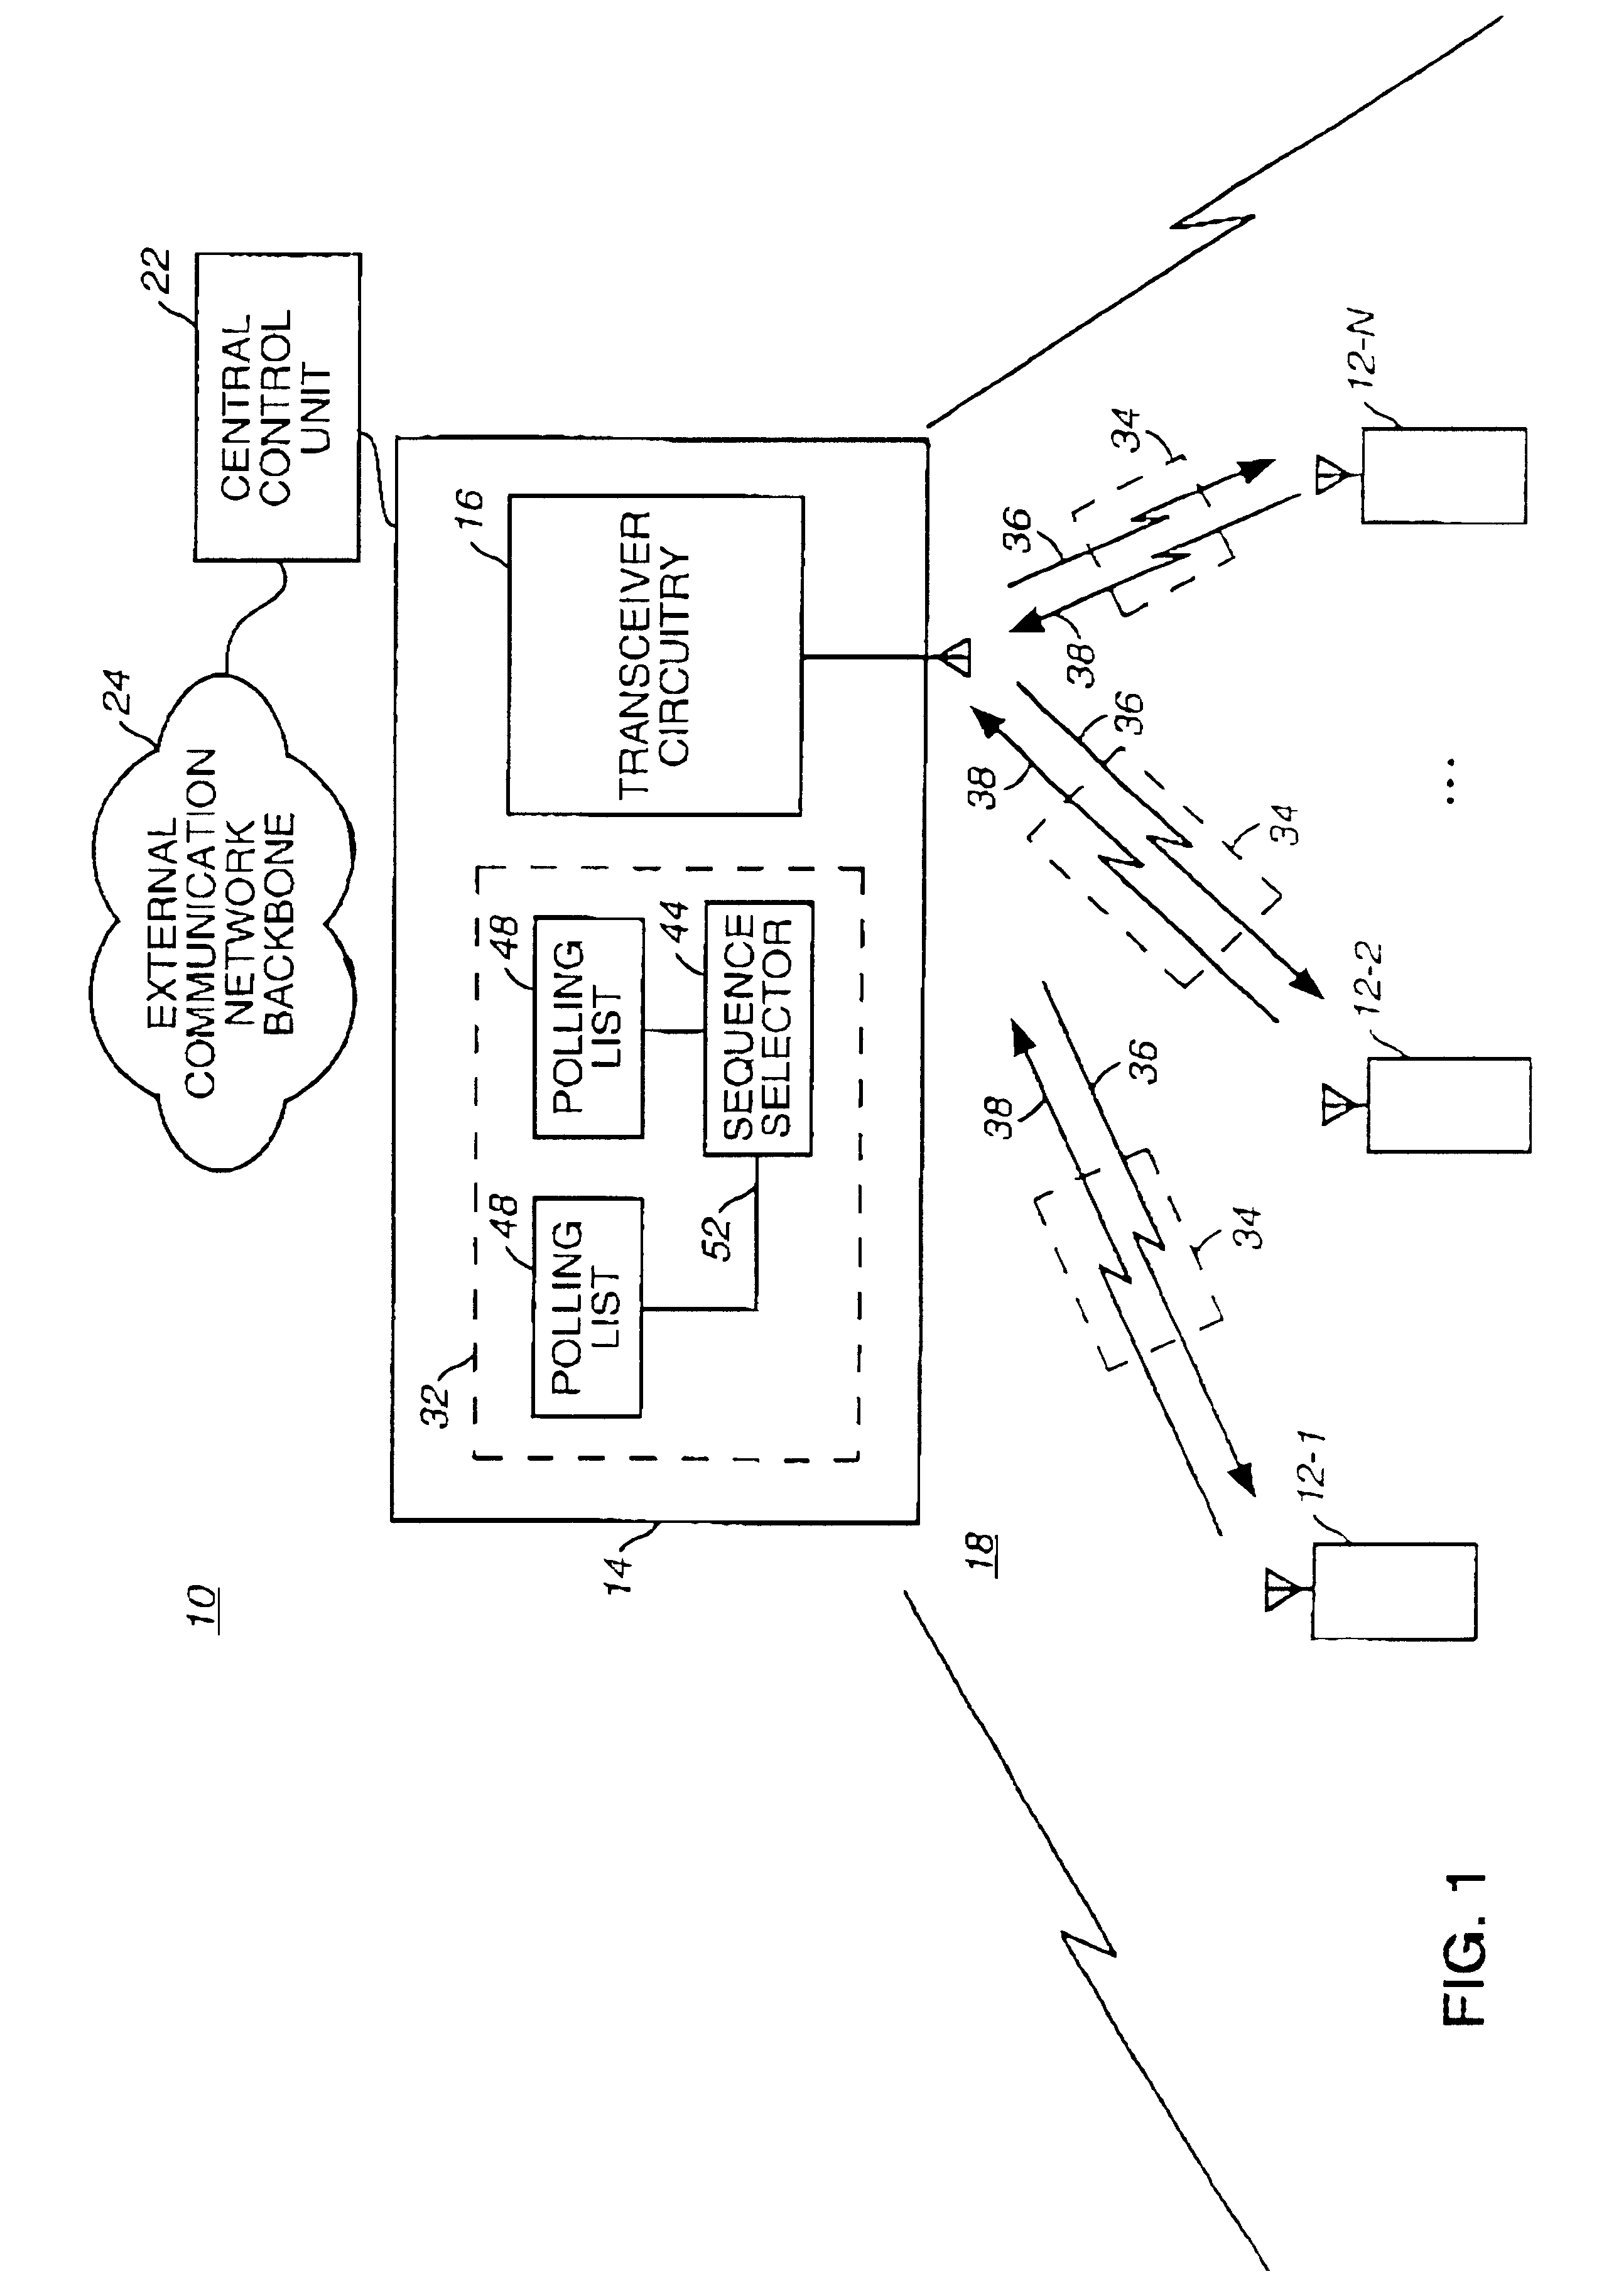 Apparatus, and associated method, for sequencing transmission of data